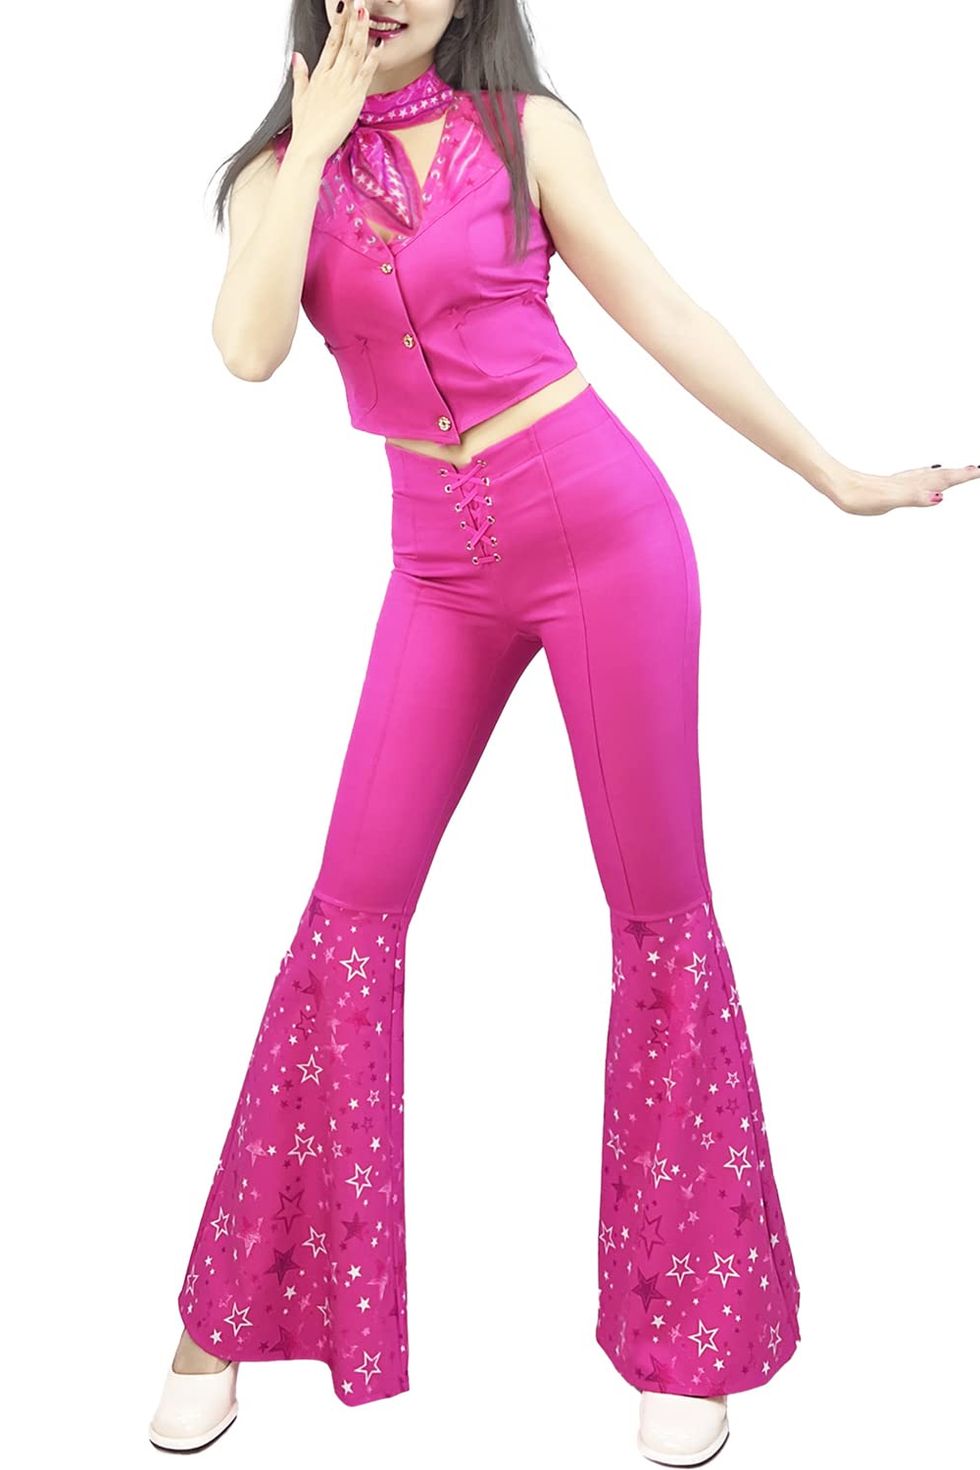  Rubie's Women's Mean Girls Regina George Halloween Outfit, As  Shown, Medium : Clothing, Shoes & Jewelry